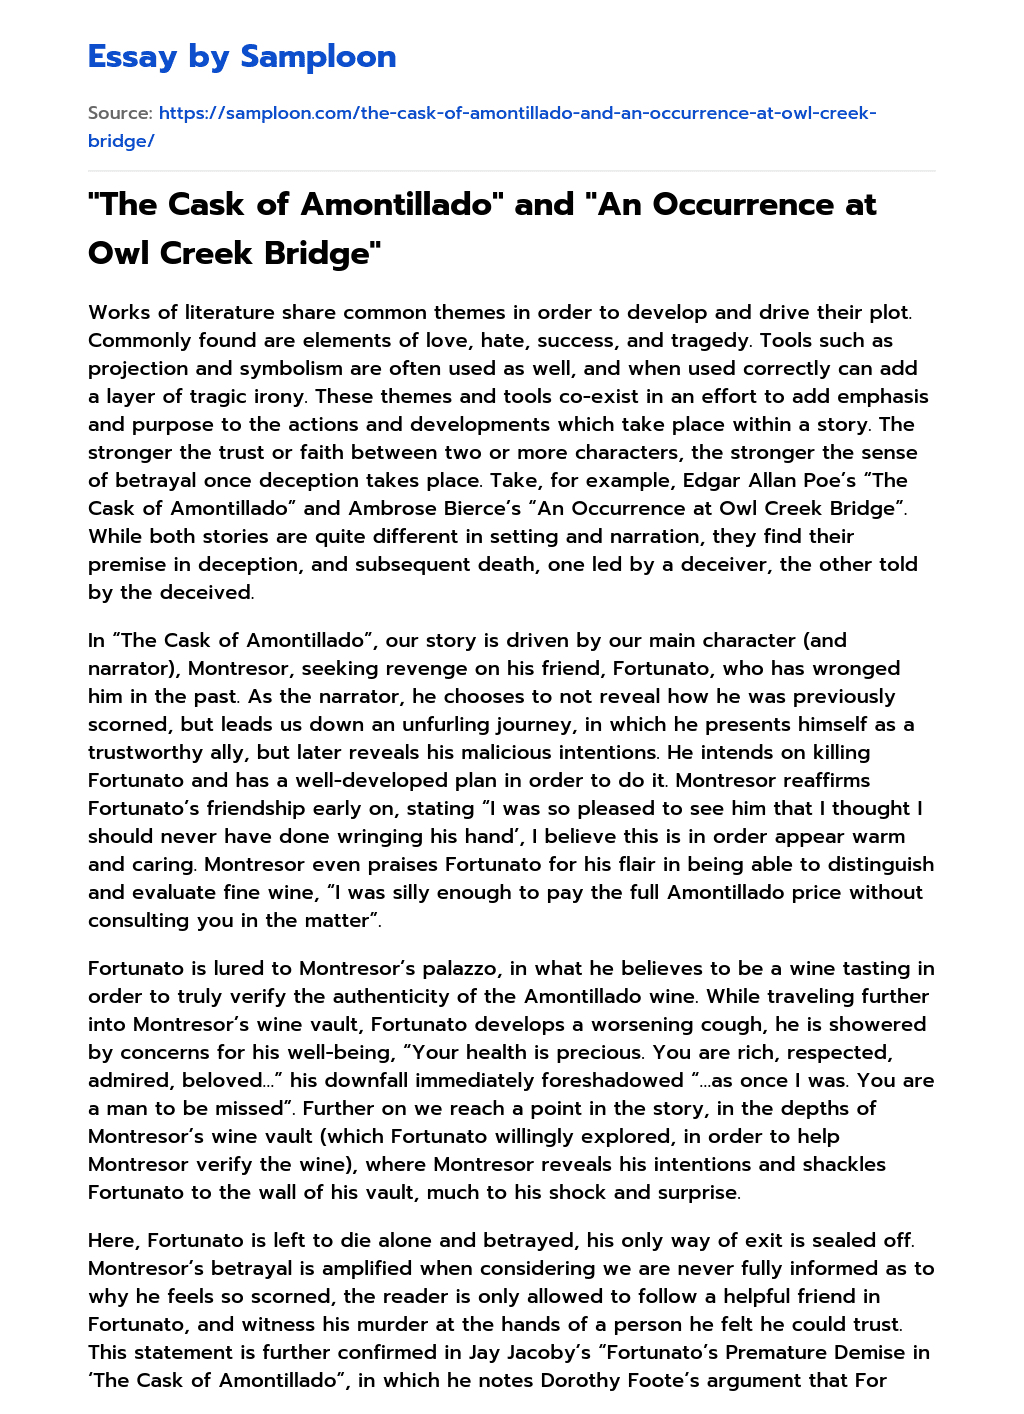 “The Cask of Amontillado” and “An Occurrence at Owl Creek Bridge” essay